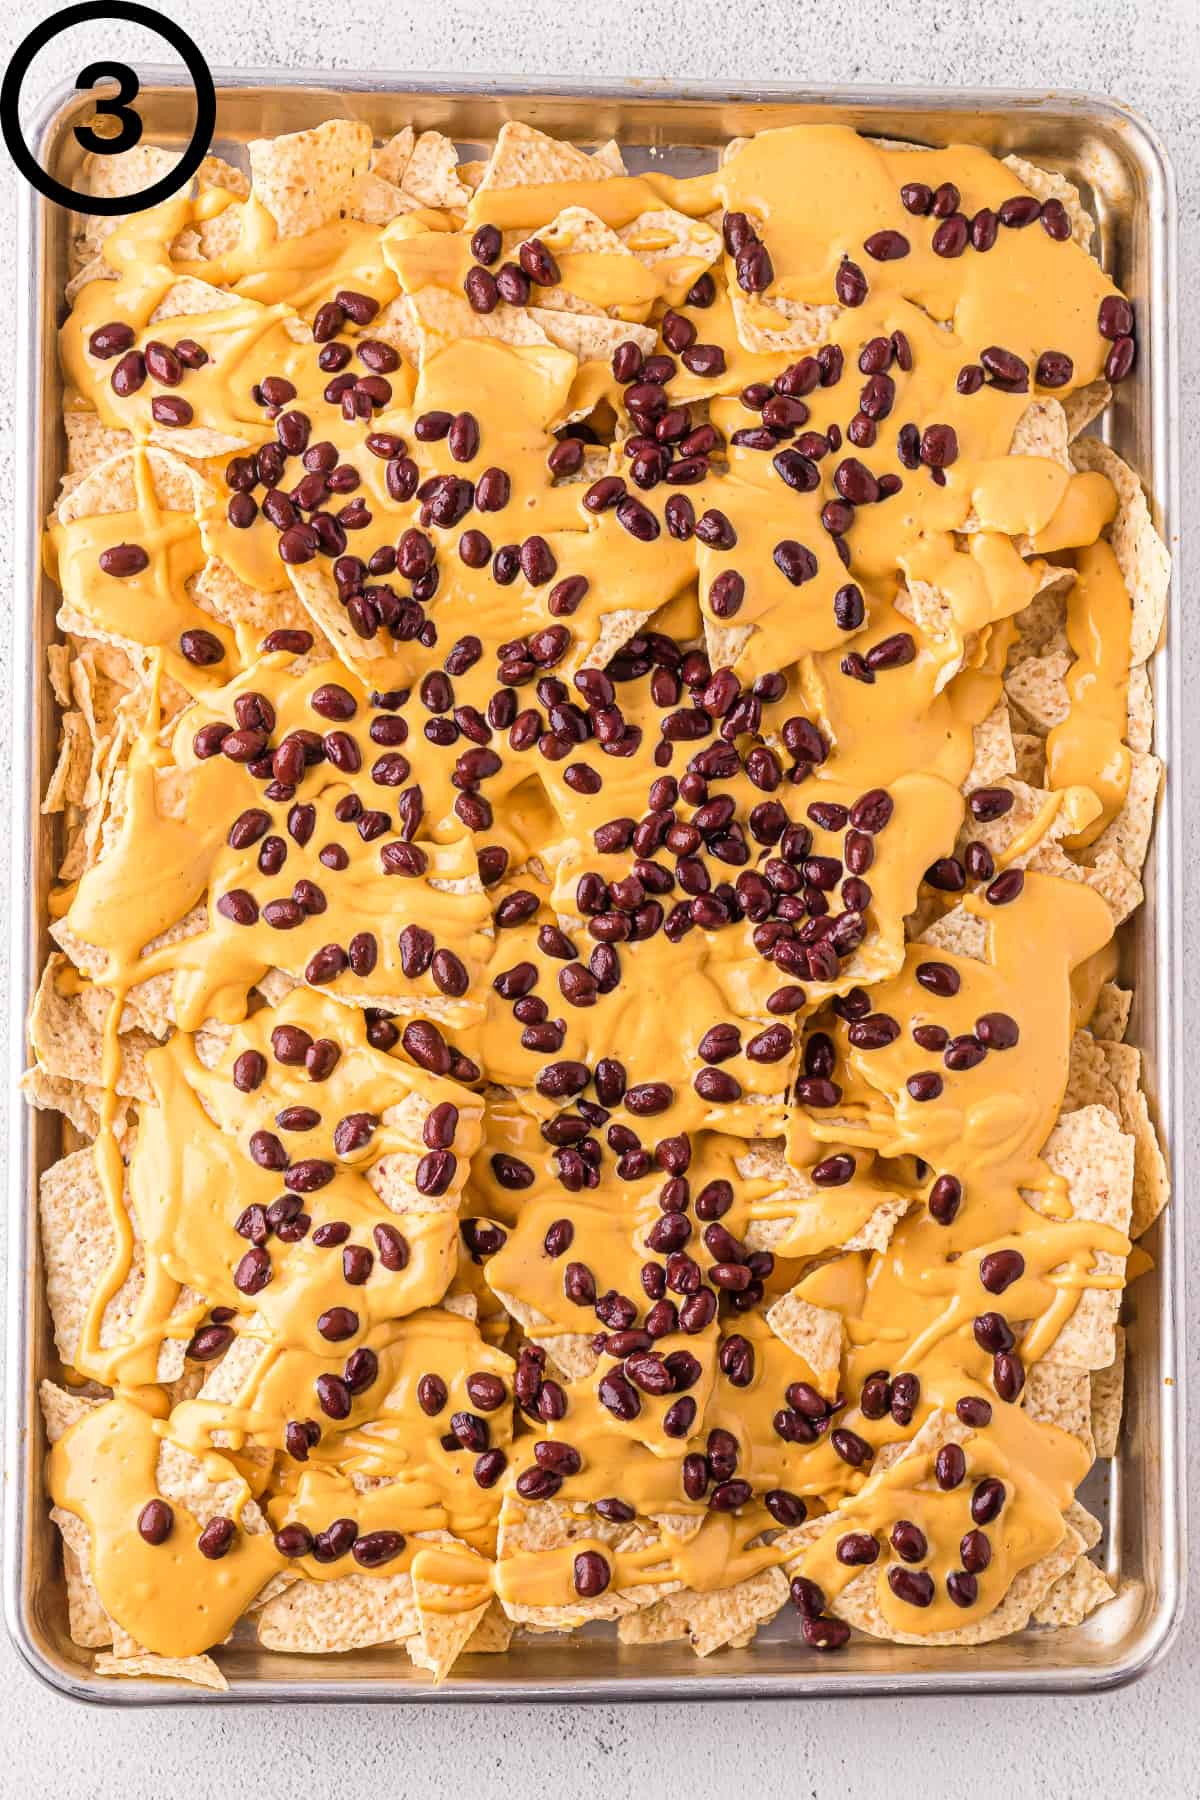 Dairy-free nachos with vegan cheese sauce and black beans.